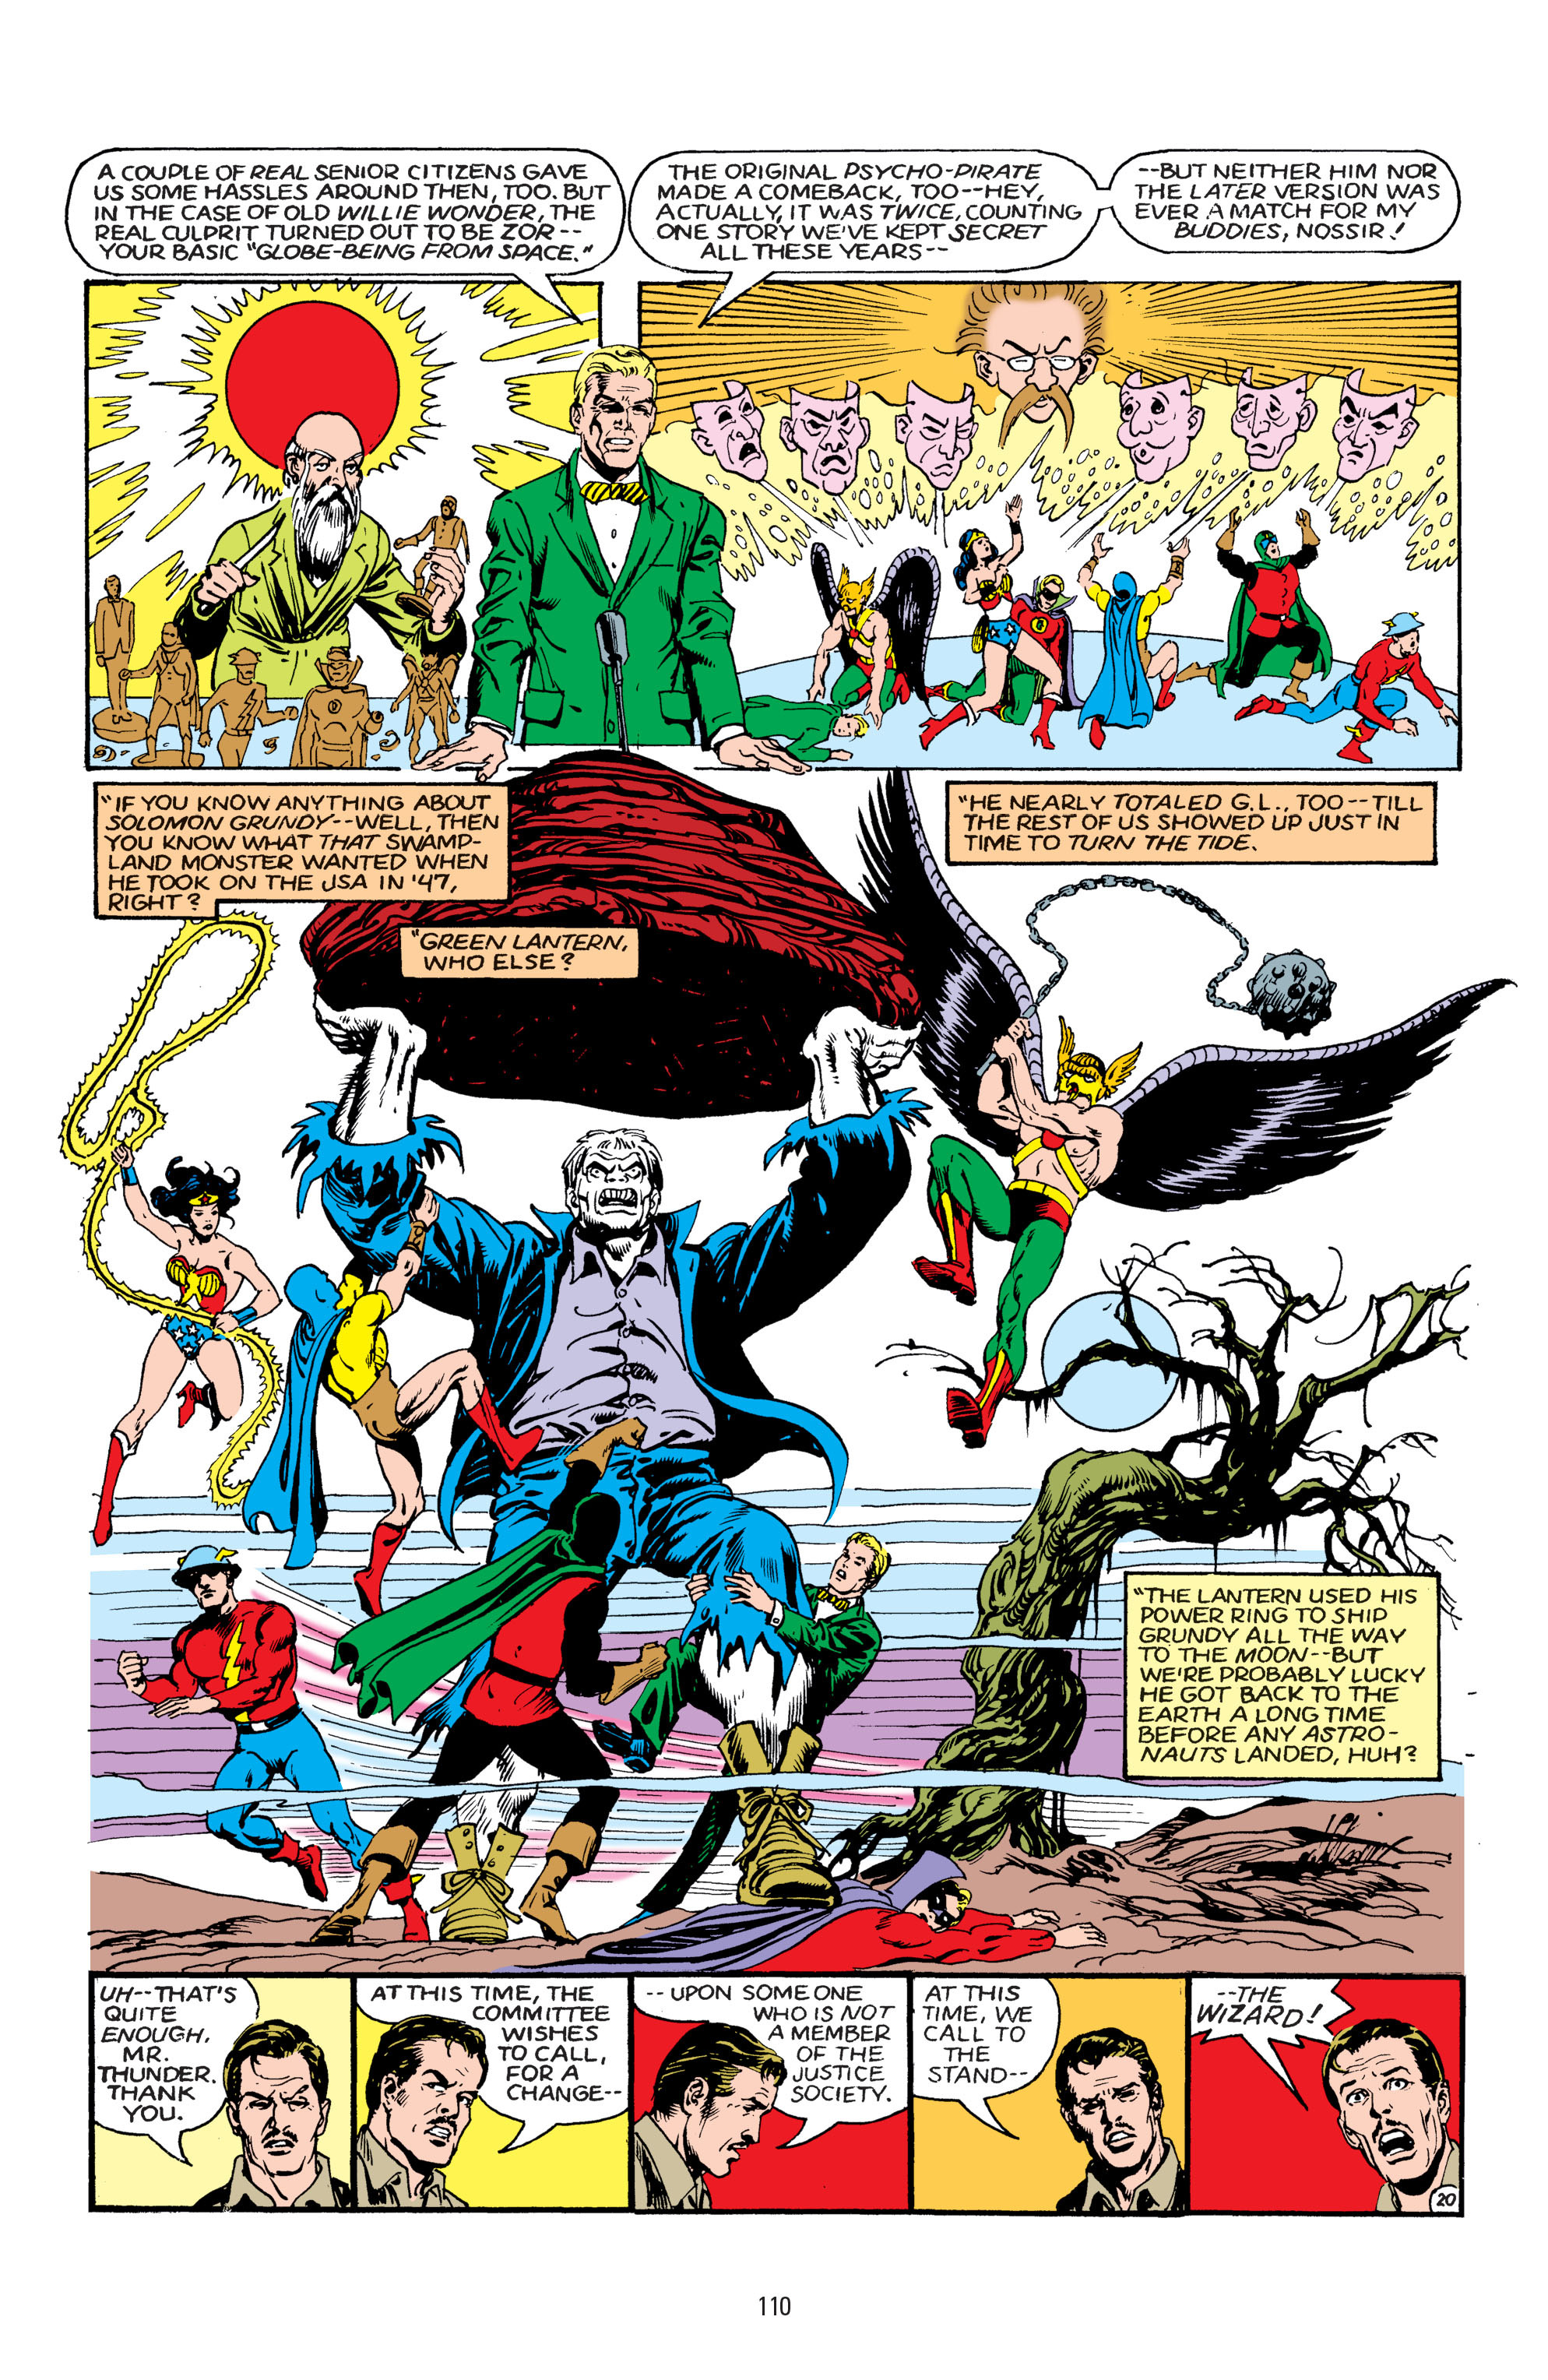 Read online America vs. the Justice Society comic -  Issue # TPB - 106